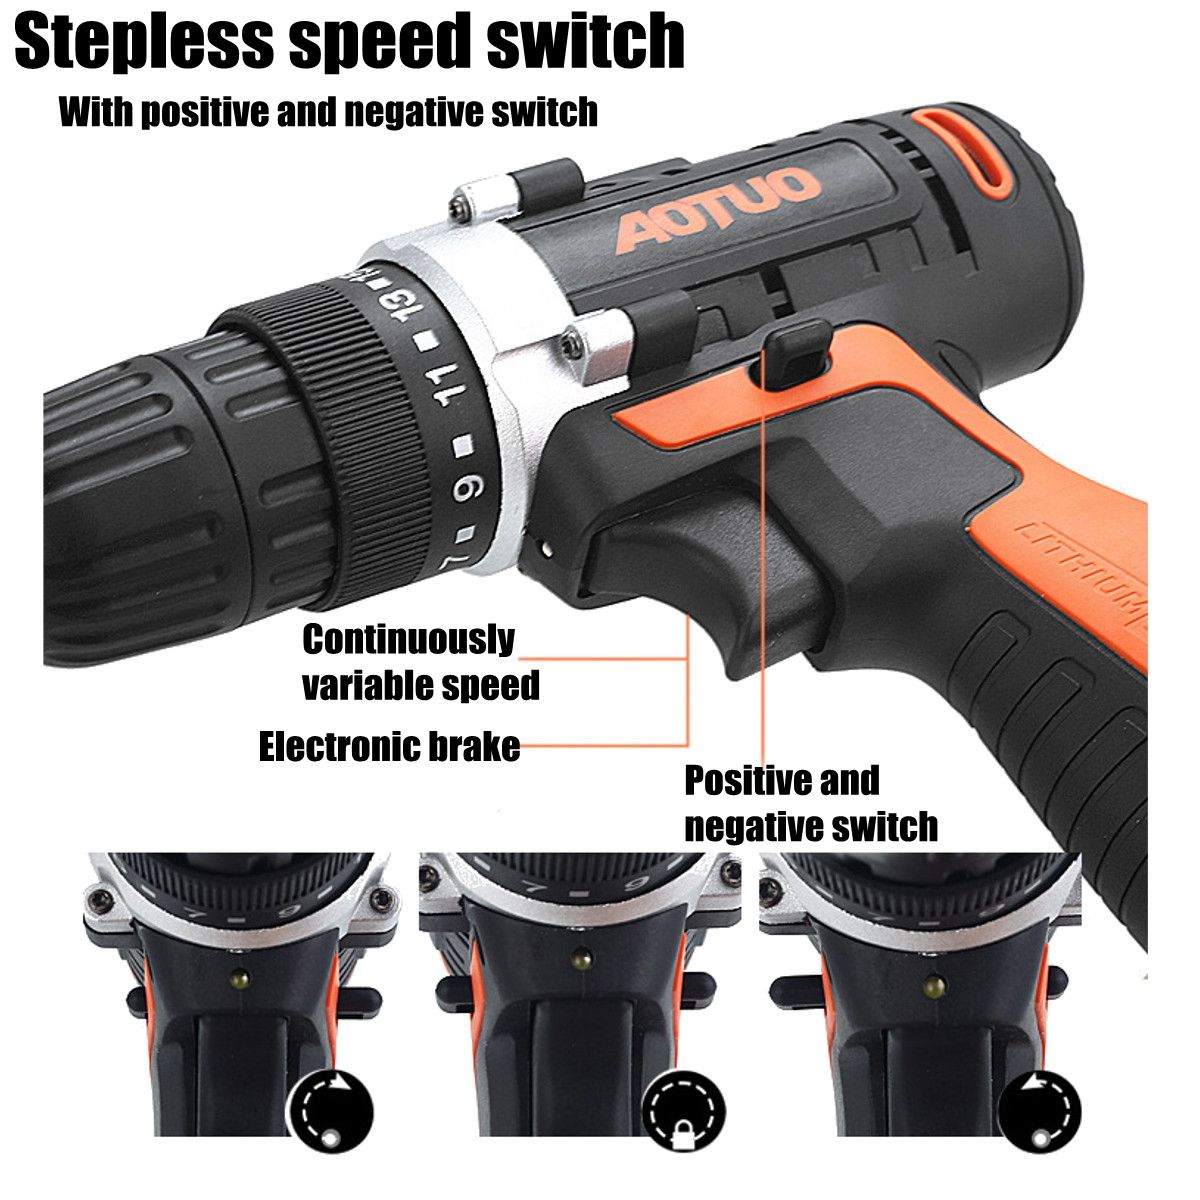 12V-78-in-1-Electric-Cordless-LED-Screwdriver-Drills-Bits-Rechargeable-Reversible-Drill-Tools-Kit-1319006